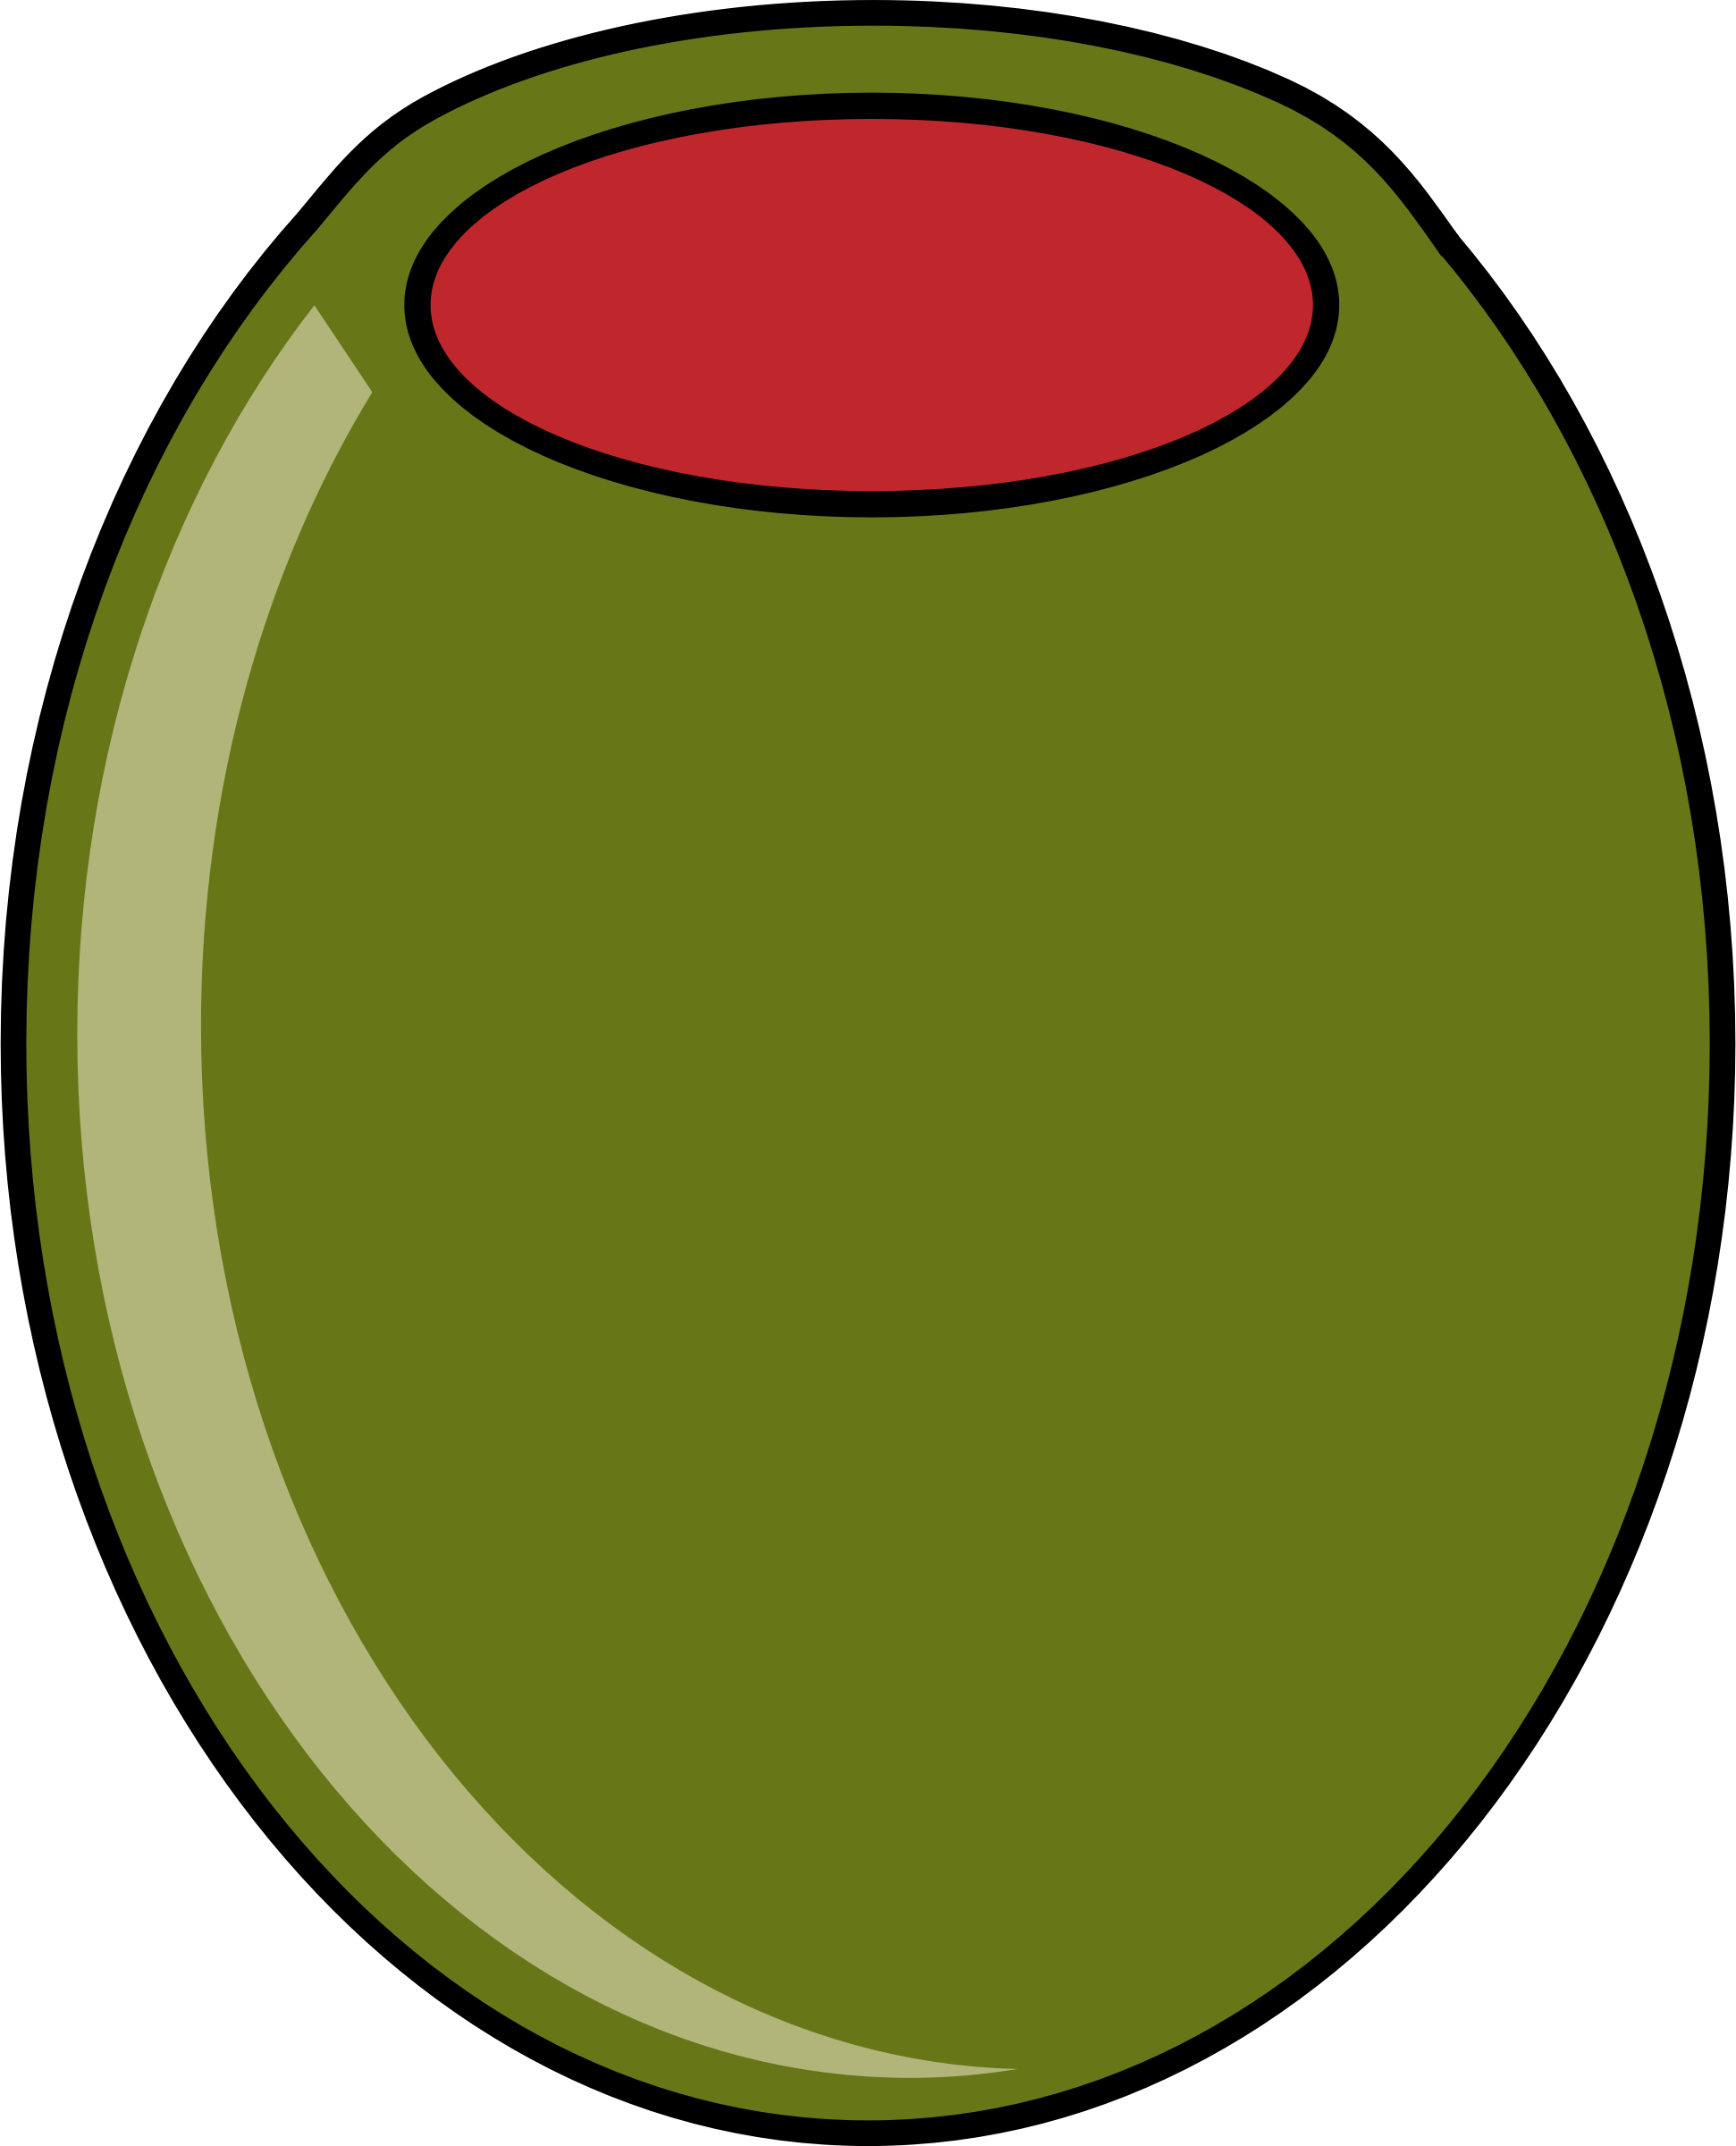 green olive clipart - photo #7